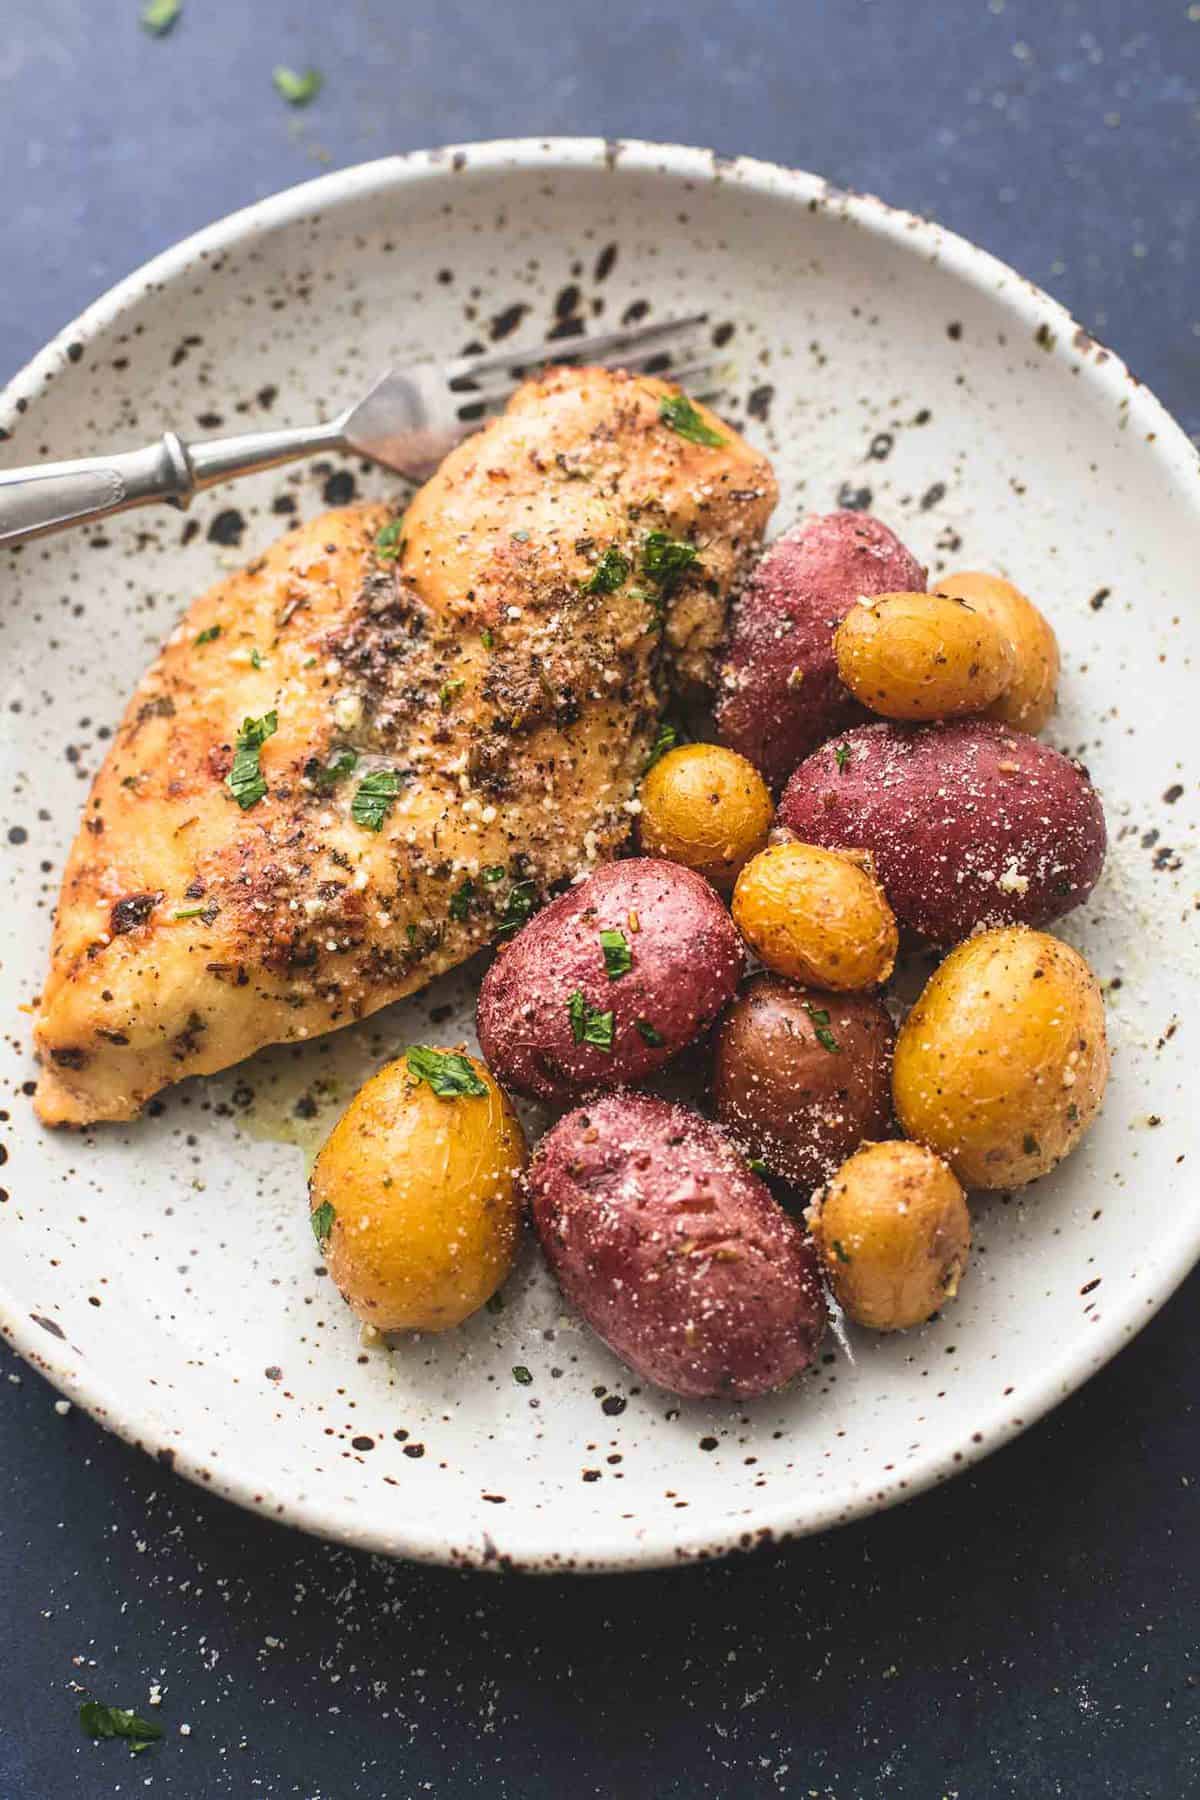 The Best Instant Pot Chicken Recipes